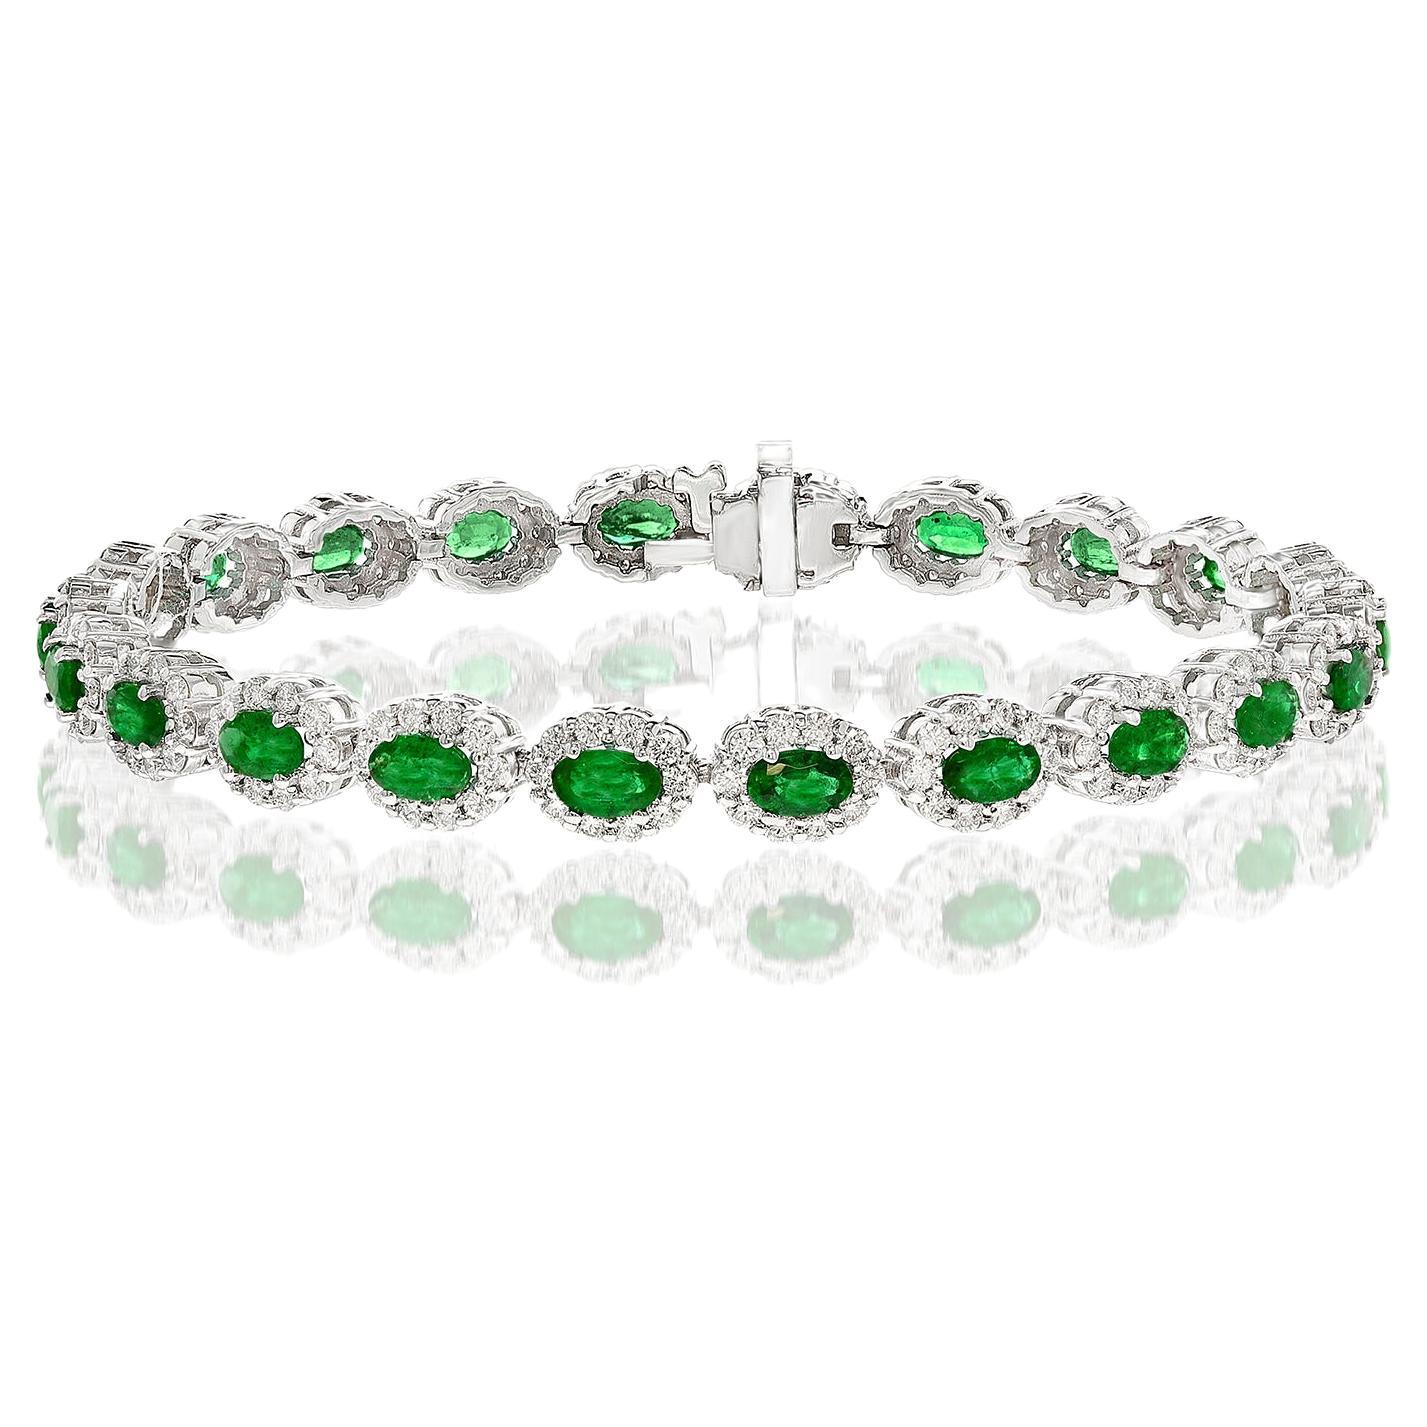 4.69 Carat Oval Cut Emerald and Diamond Halo Bracelet in 14K White Gold For Sale